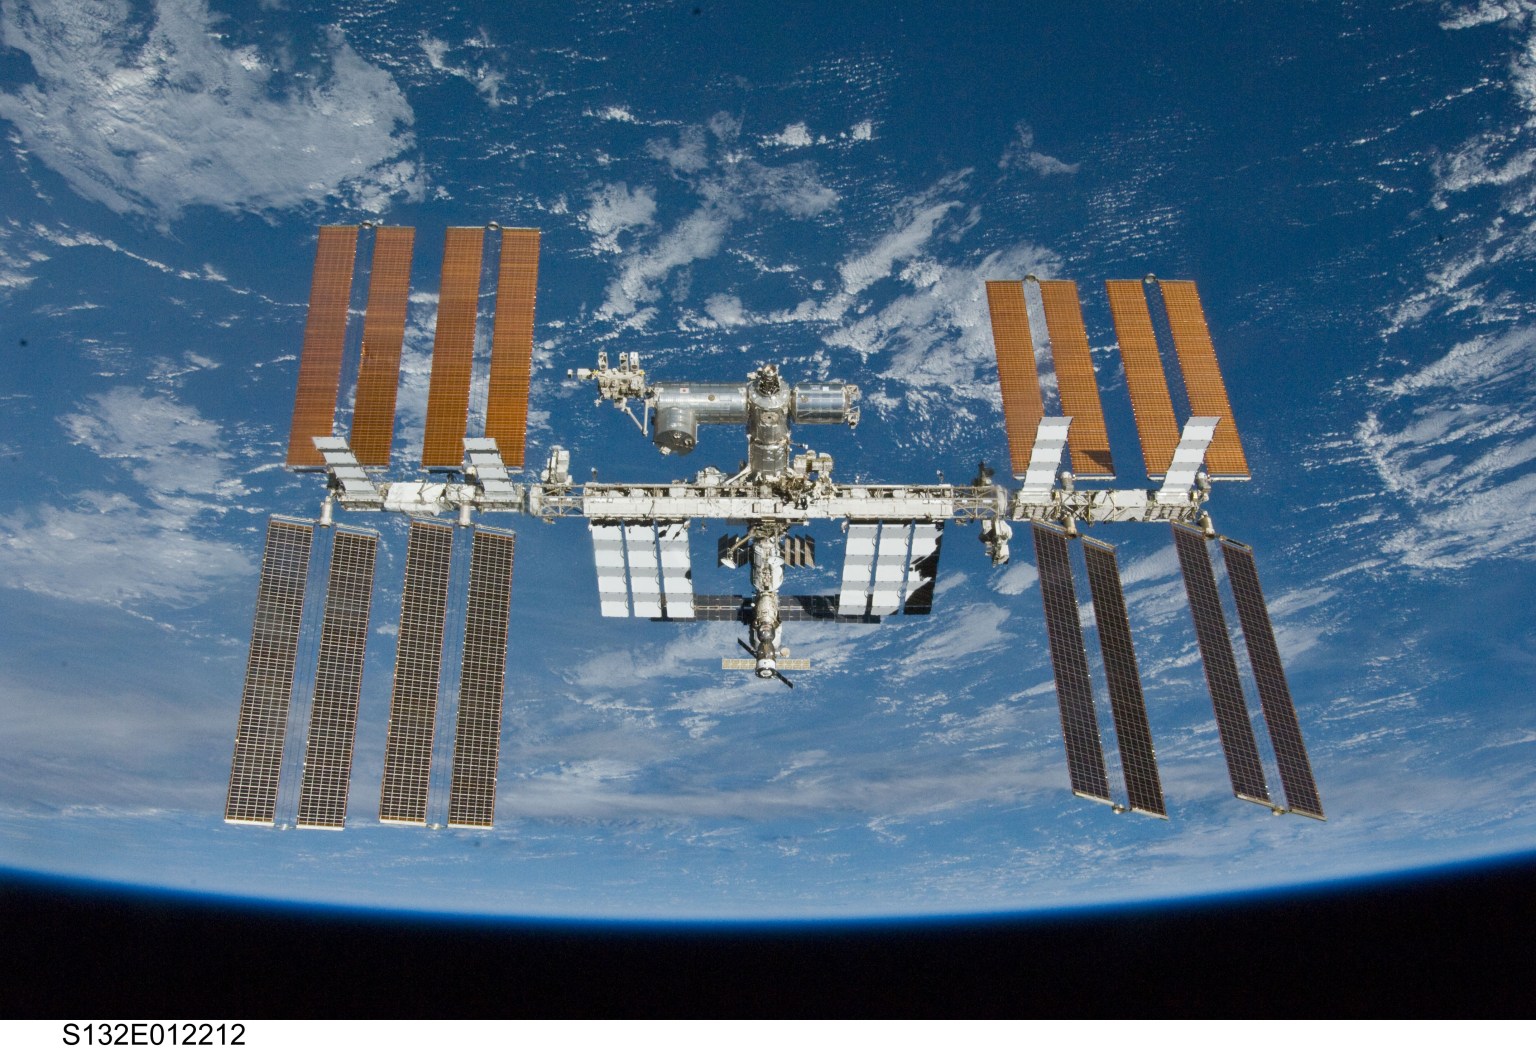 The International Space Station orbiting the Earth.